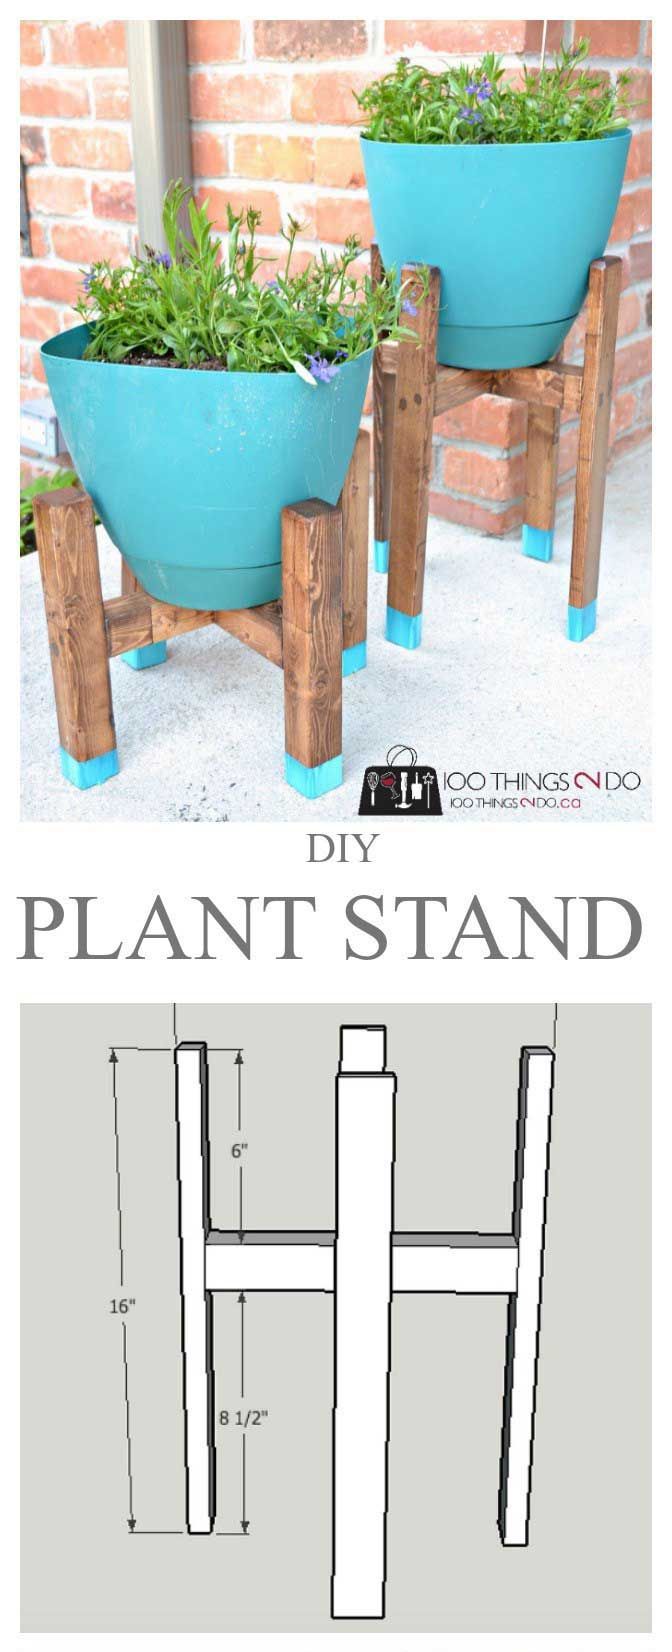 20 Insanely Cool DIY Yard and Patio Furniture - Patio Furniture - Ideas of Patio...